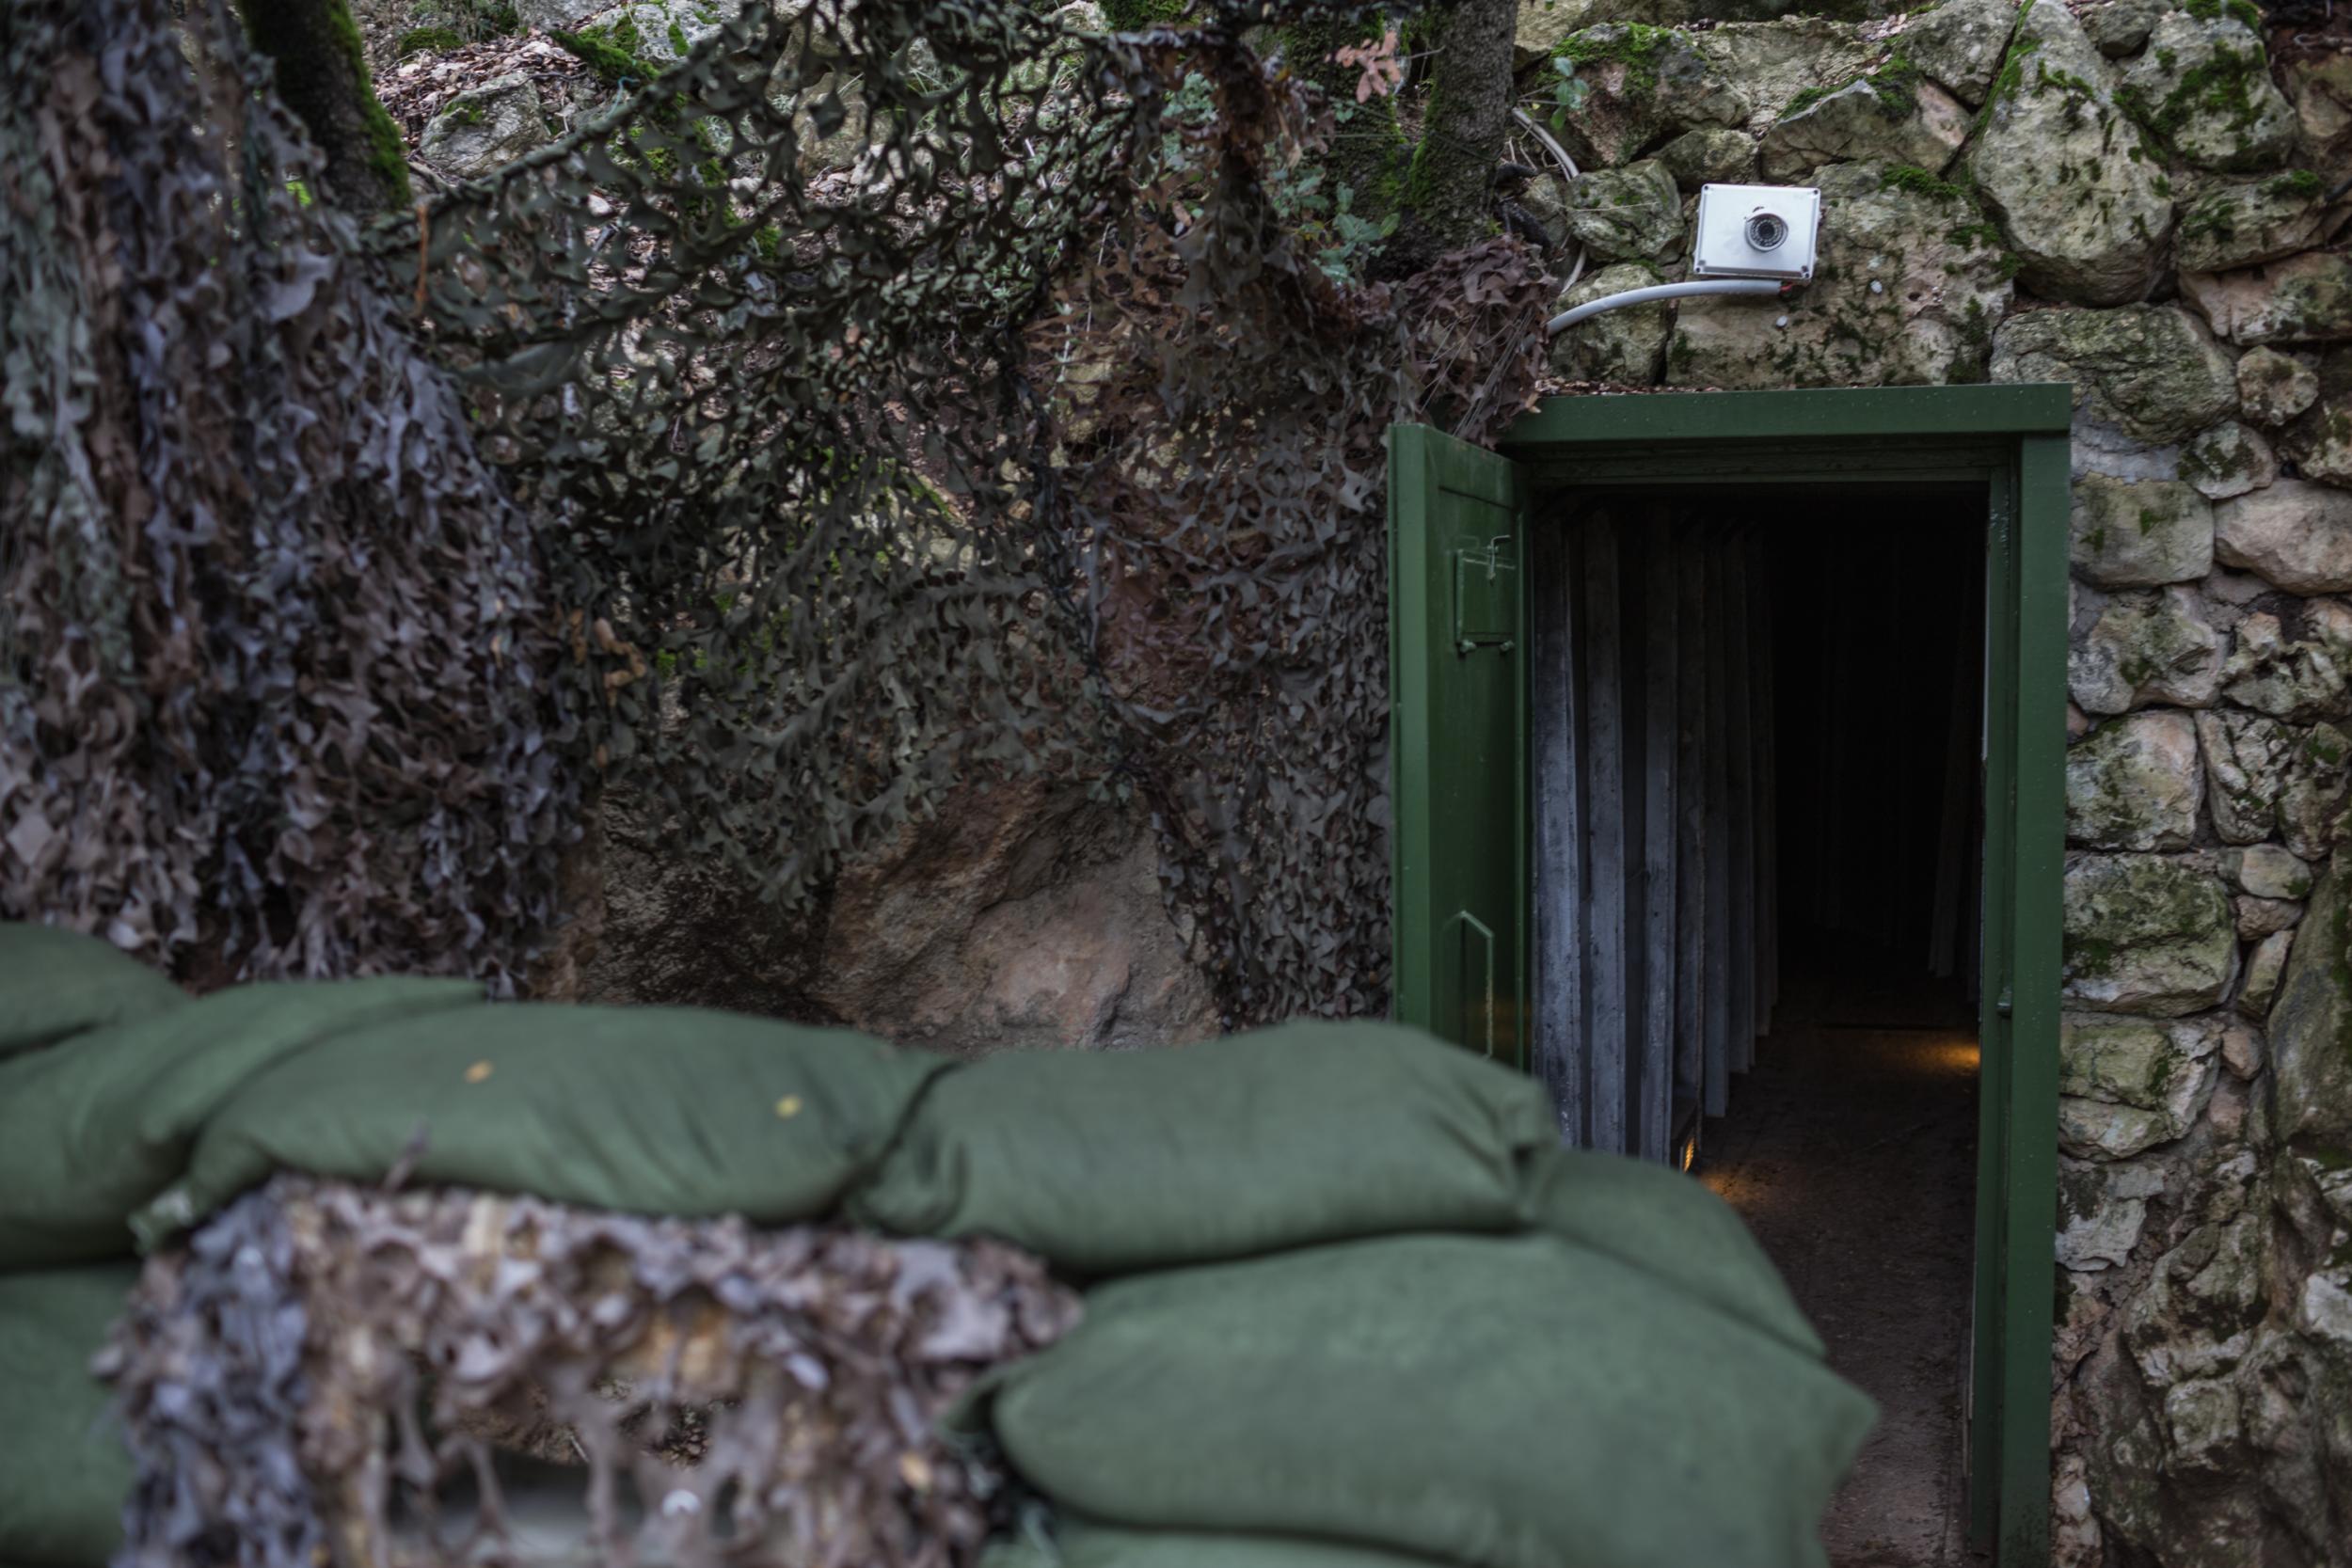 The entrance to the tunnel bunker complex at Hezbollah’s museum (Sam Tarling/The Independent)